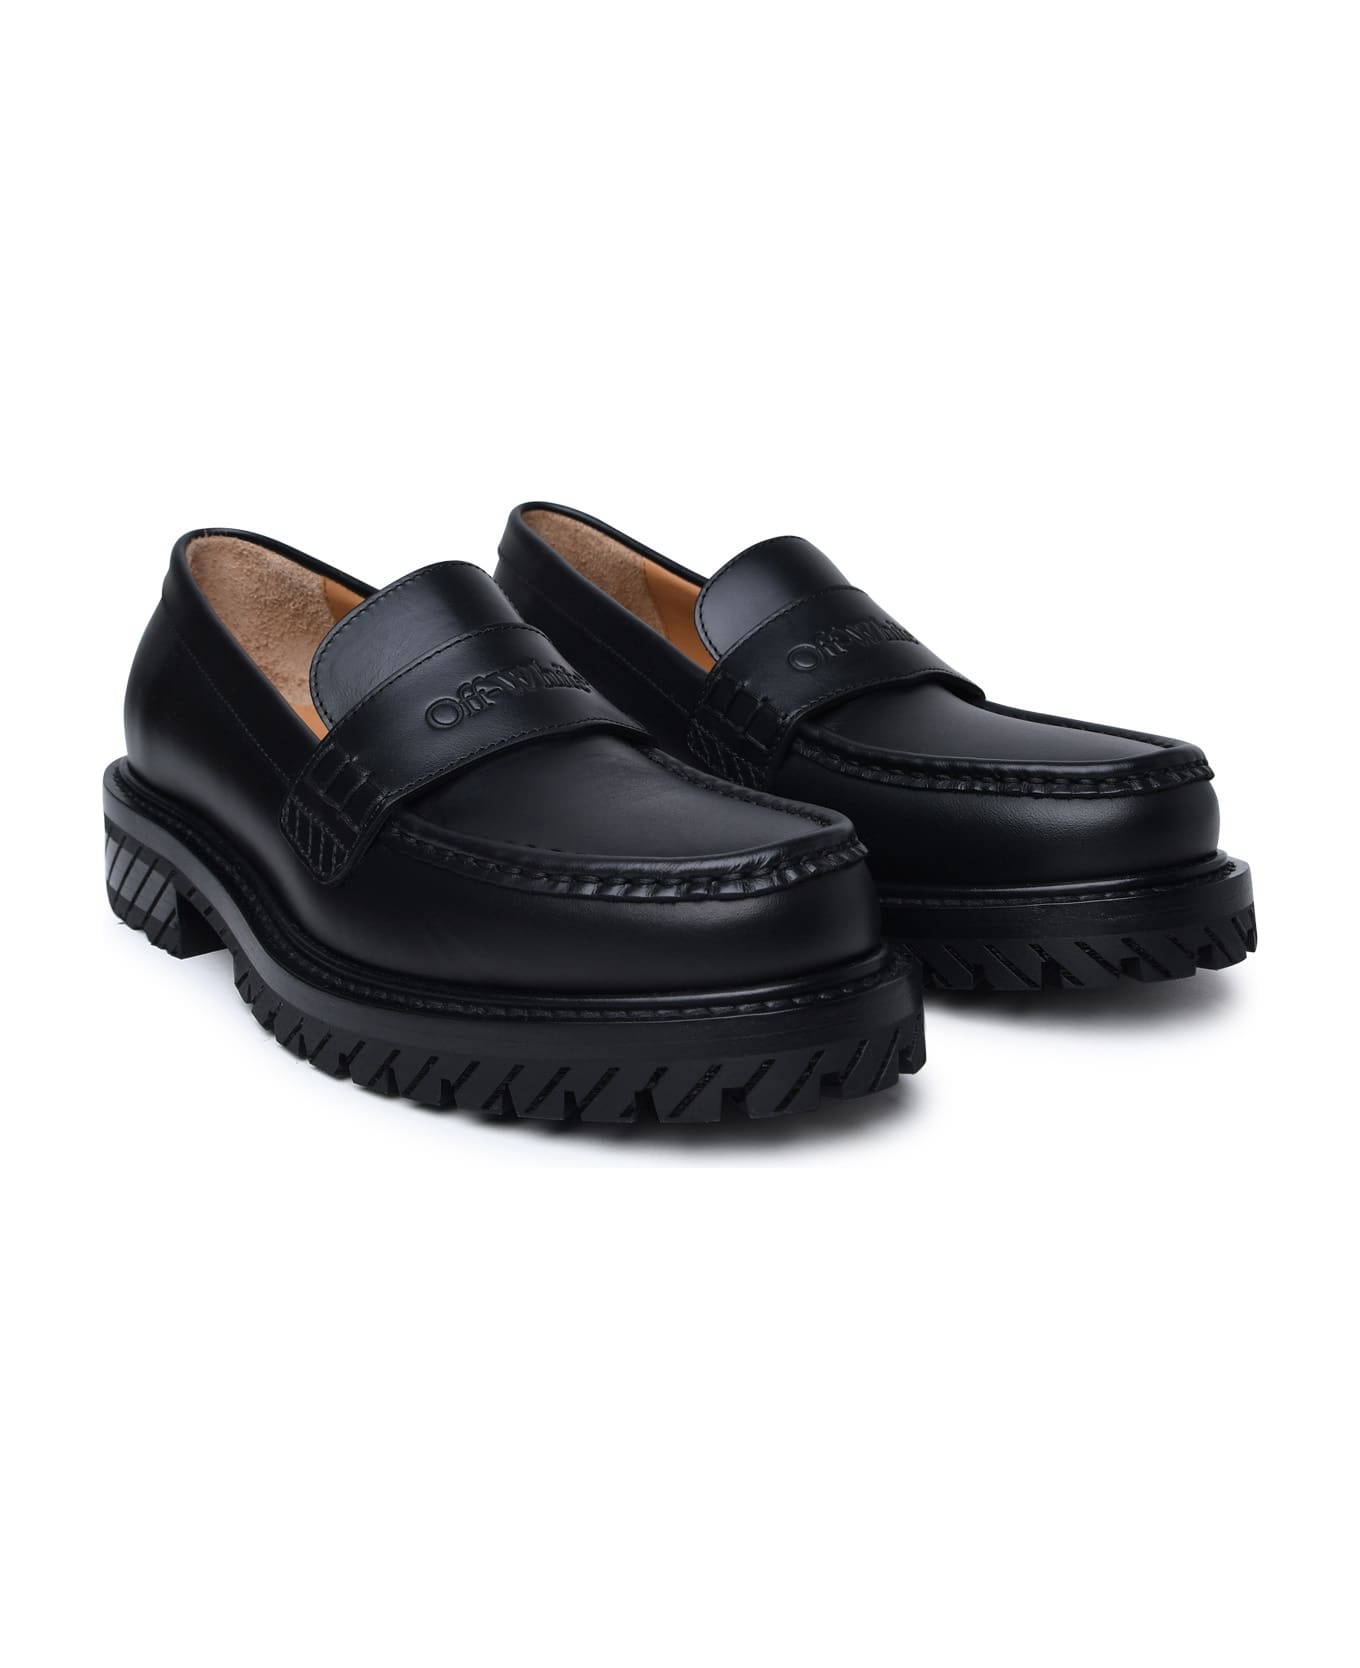 Off-White Black Leather Loafers - Black